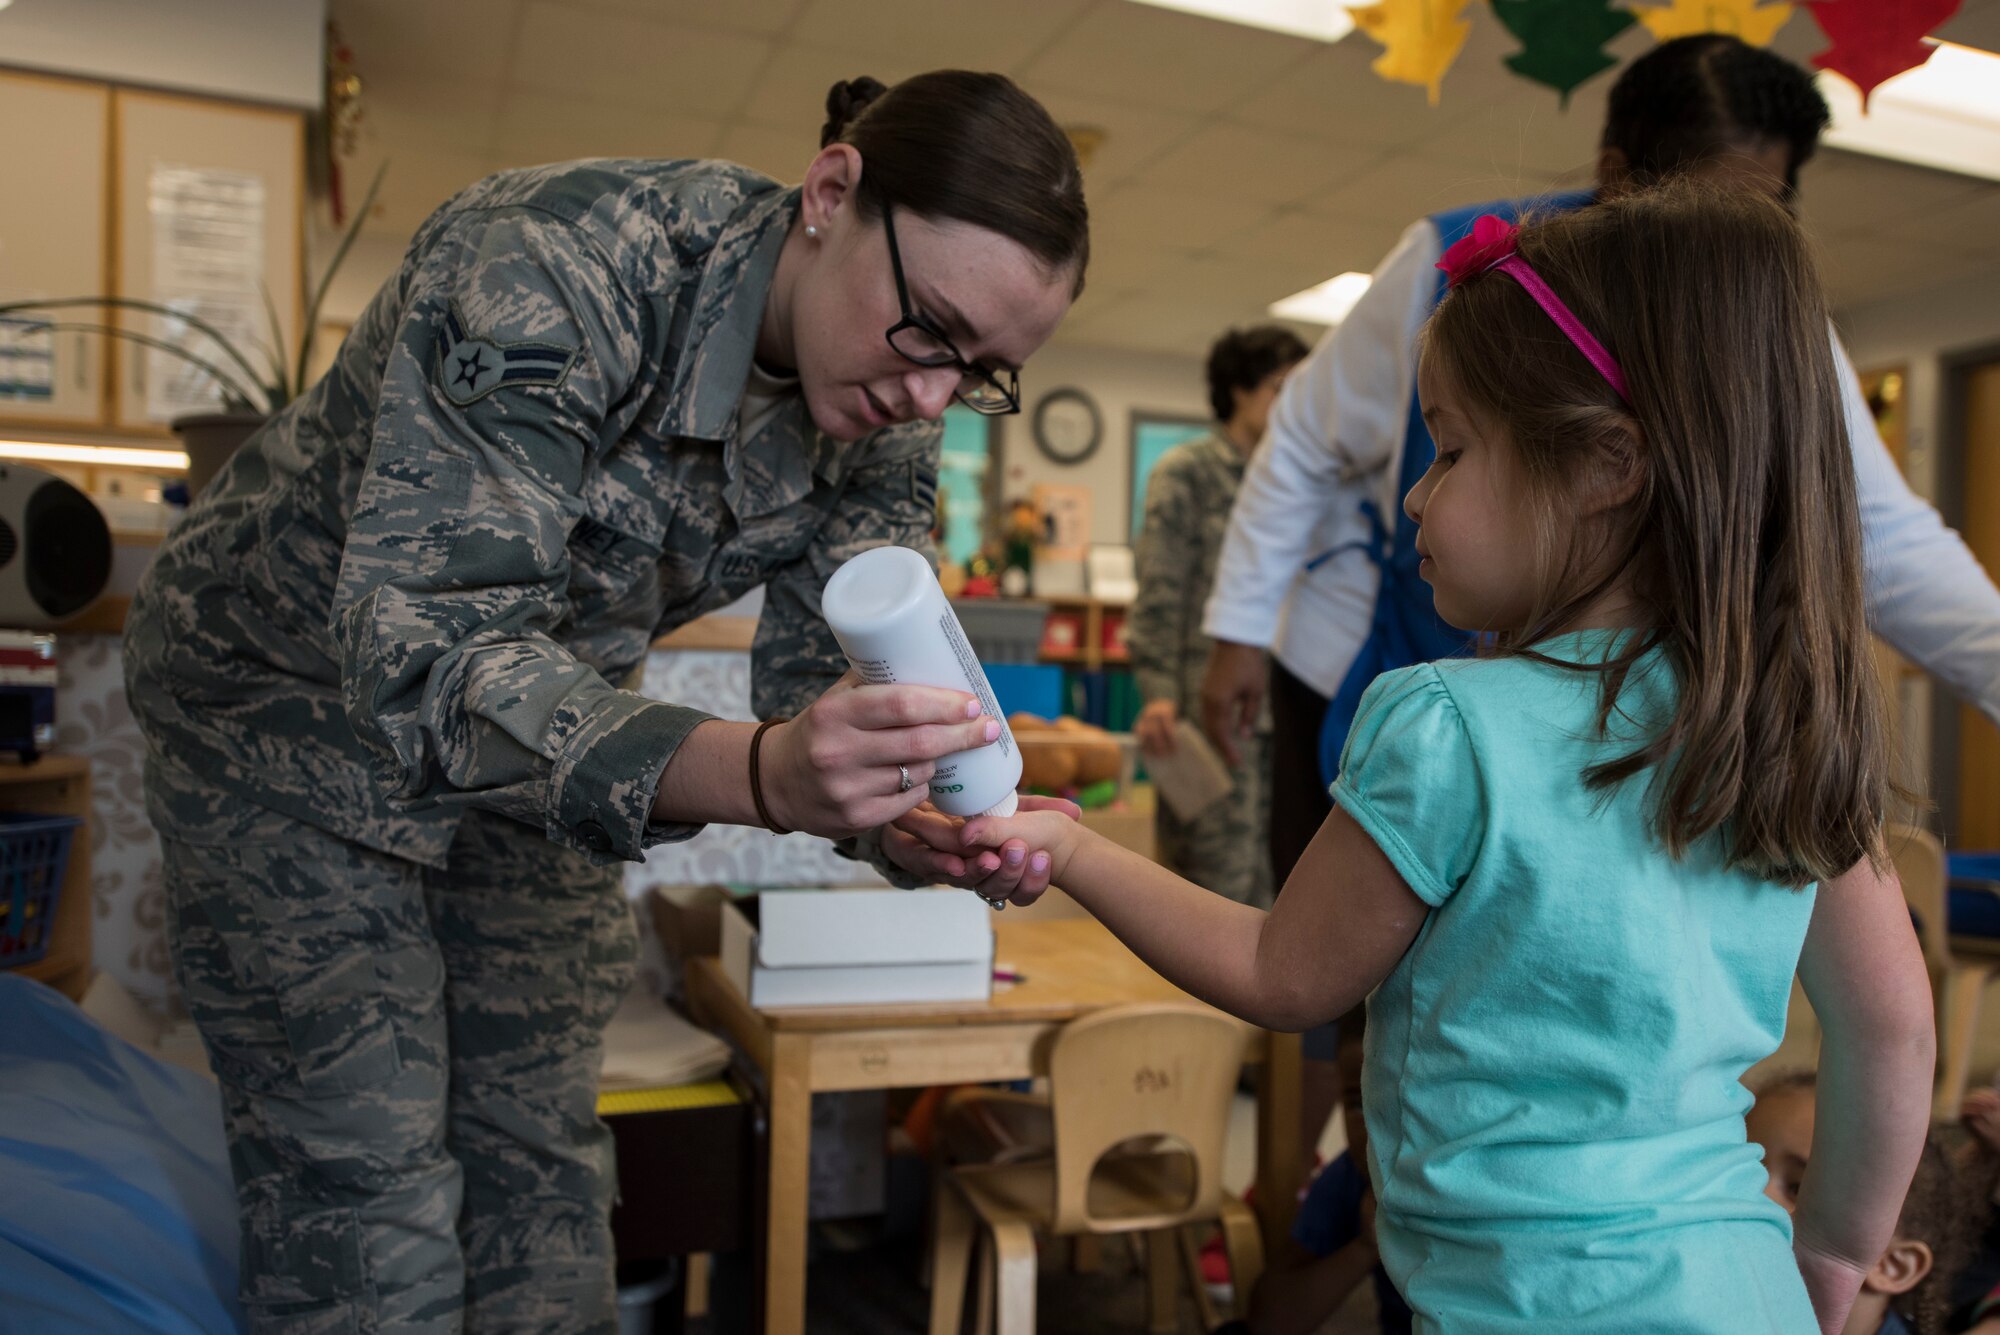 Airman 1st Class Samantha Downey, 436th Aerospace Medicine Squadron public health technician, puts a germ-simulating lotion on the hands of Alessandra Lowry, a student at the Child Development Center, Oct. 16, 2018, during a hand-washing demonstration at the CDC on Dover Air Force Base, Del. The lotion acts as germs on the children’s hands and even after washing some residue may still show up under a black light. (U.S. Air Force photo by Airman 1st Class Zoe M. Wockenfuss)